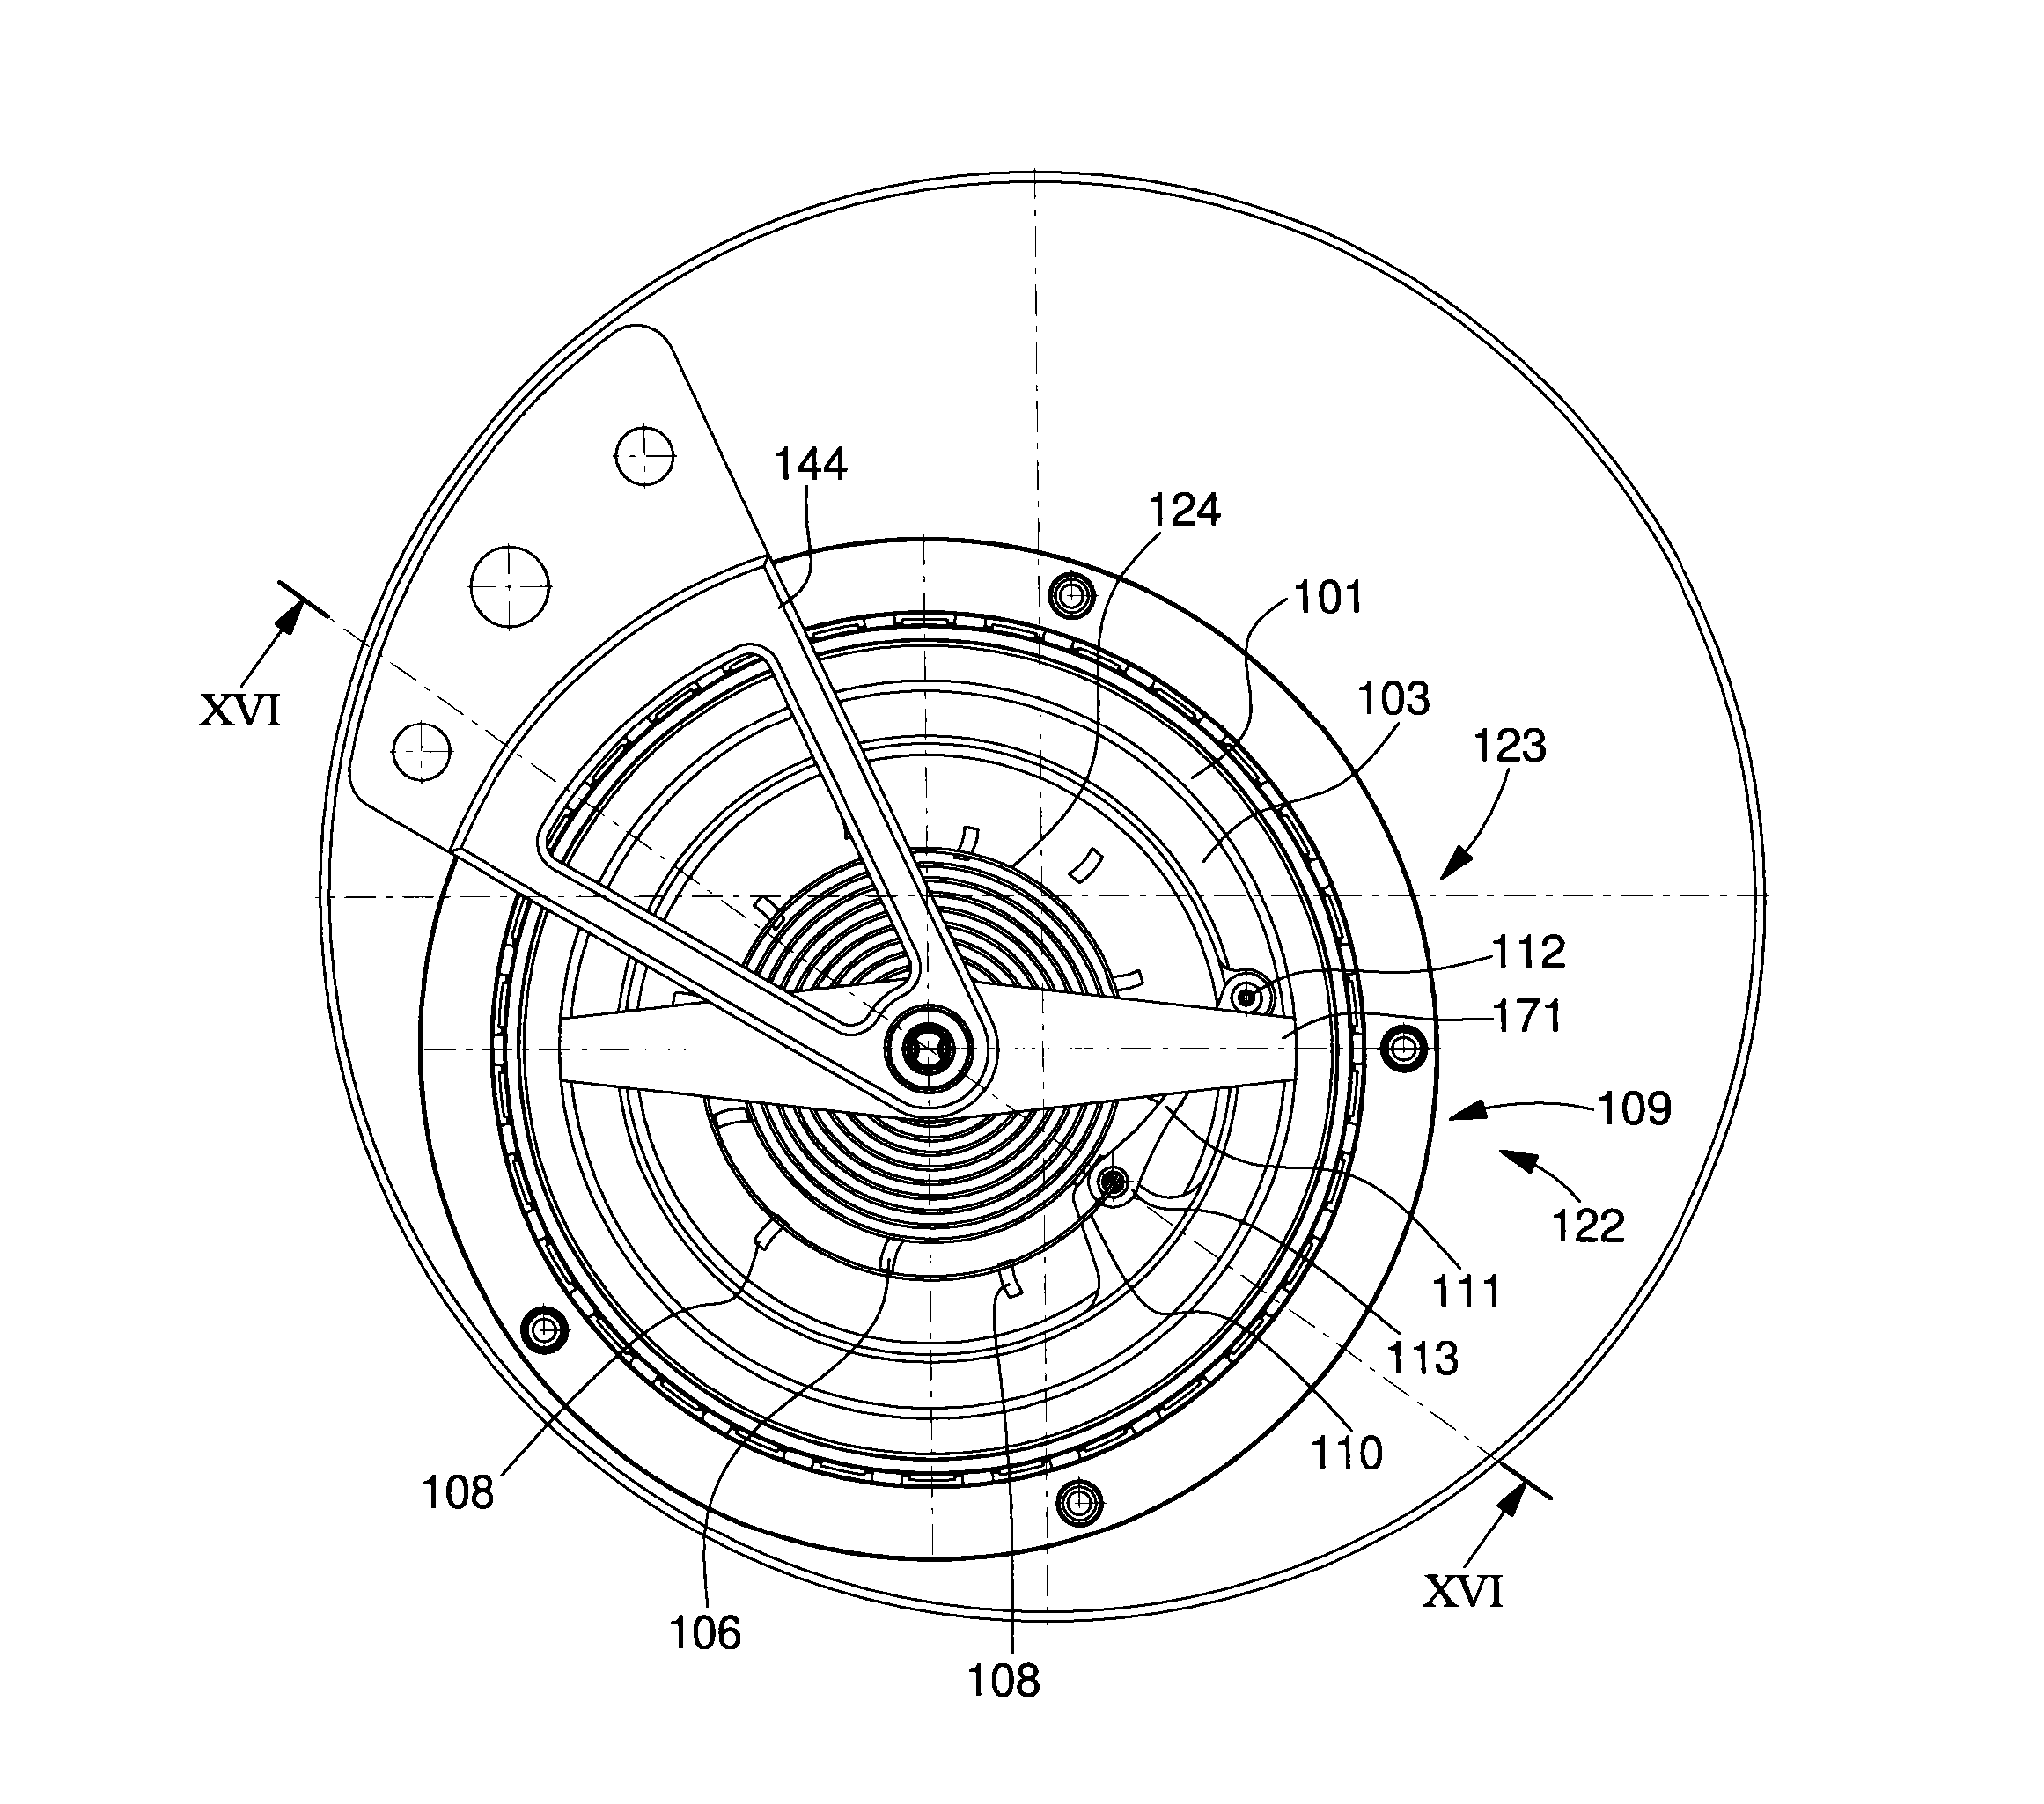 Escapement system for a sprung balance resonator